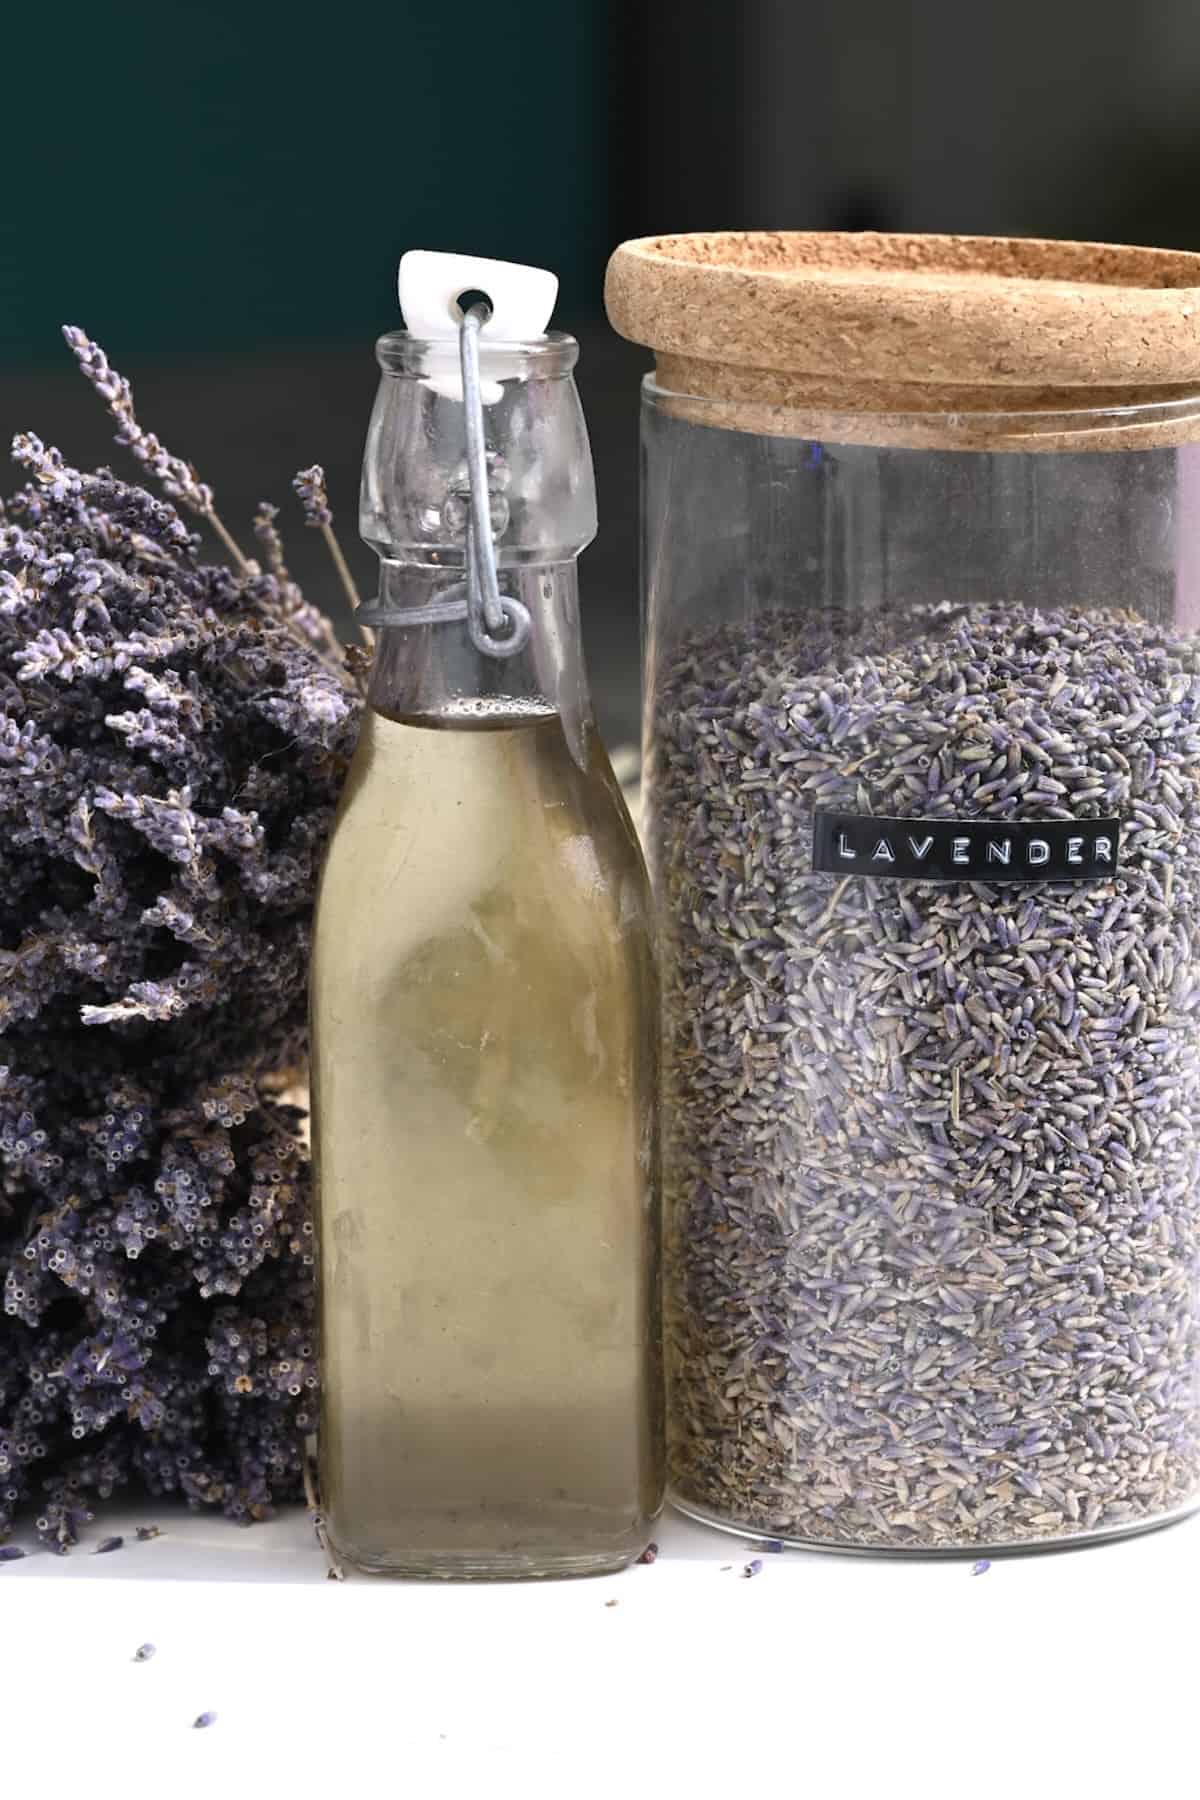 Lavender syrup in a bottle next to a jar with lavender petals